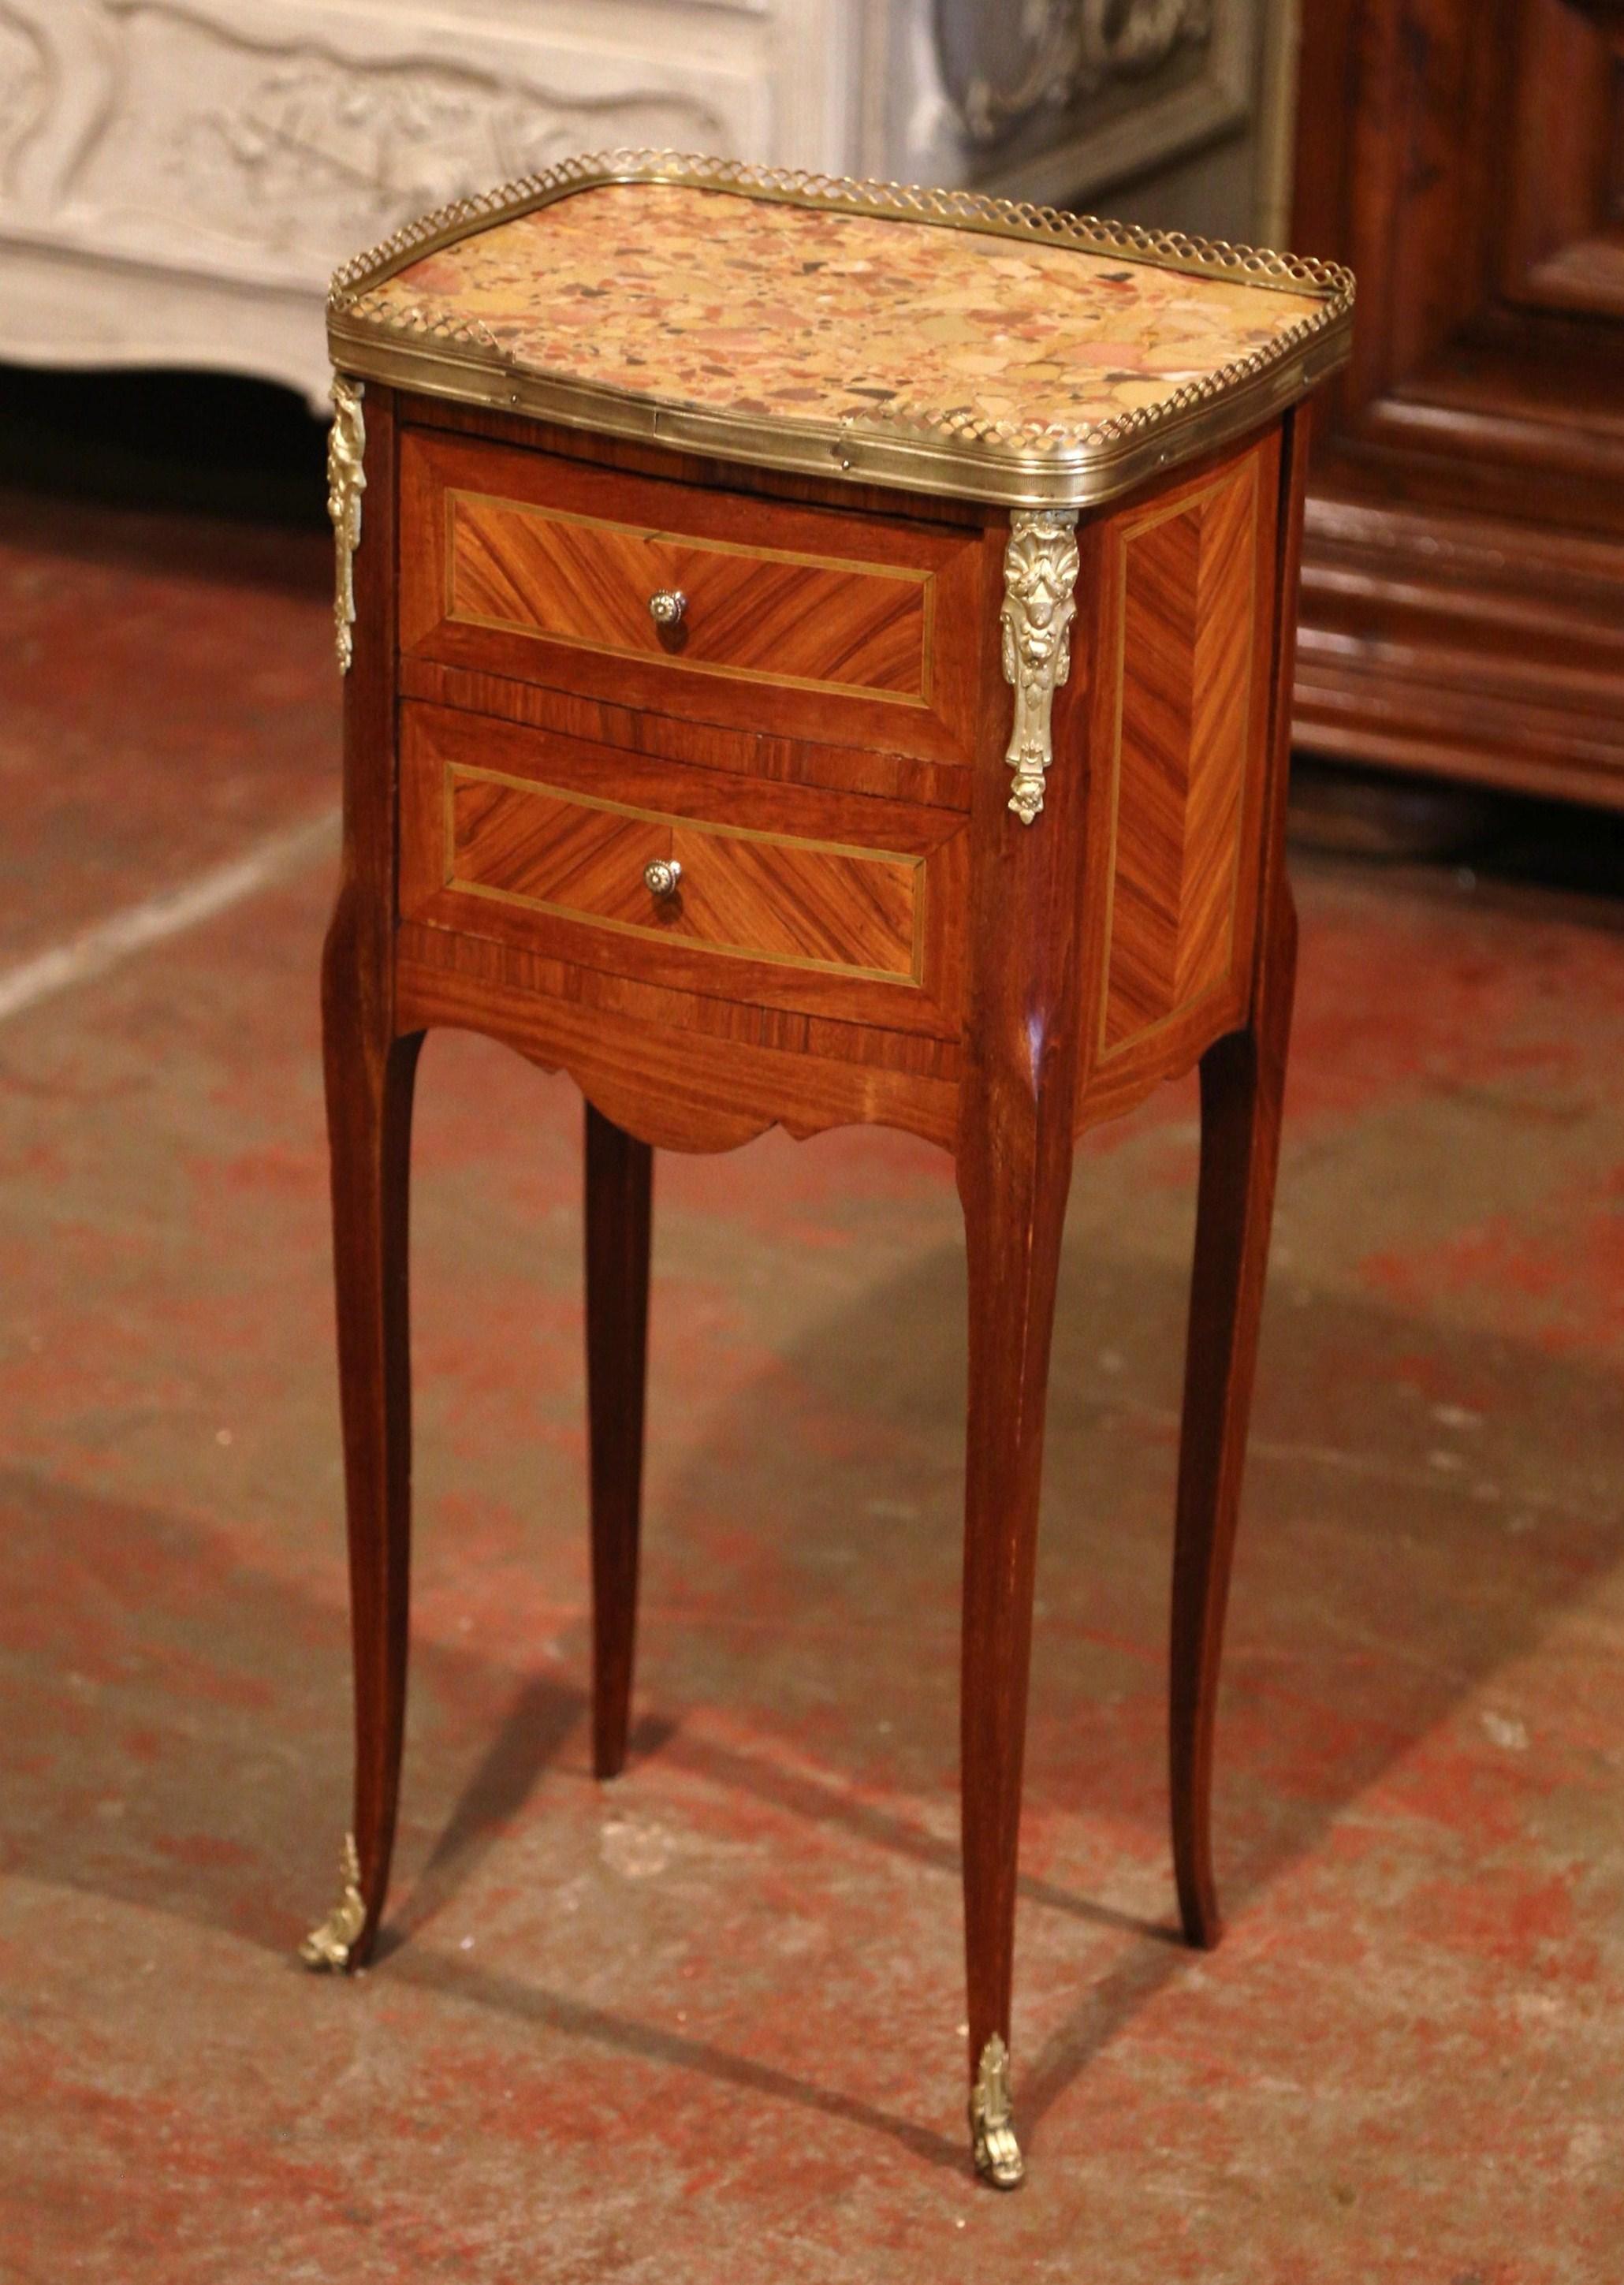 Crafted in France circa 1890, this elegant antique chest sits on cabriole legs decorated with bronze caps feet over a scalloped apron. The petite Louis XV style commode features two drawers across the front decorated with marquetry inlay work and